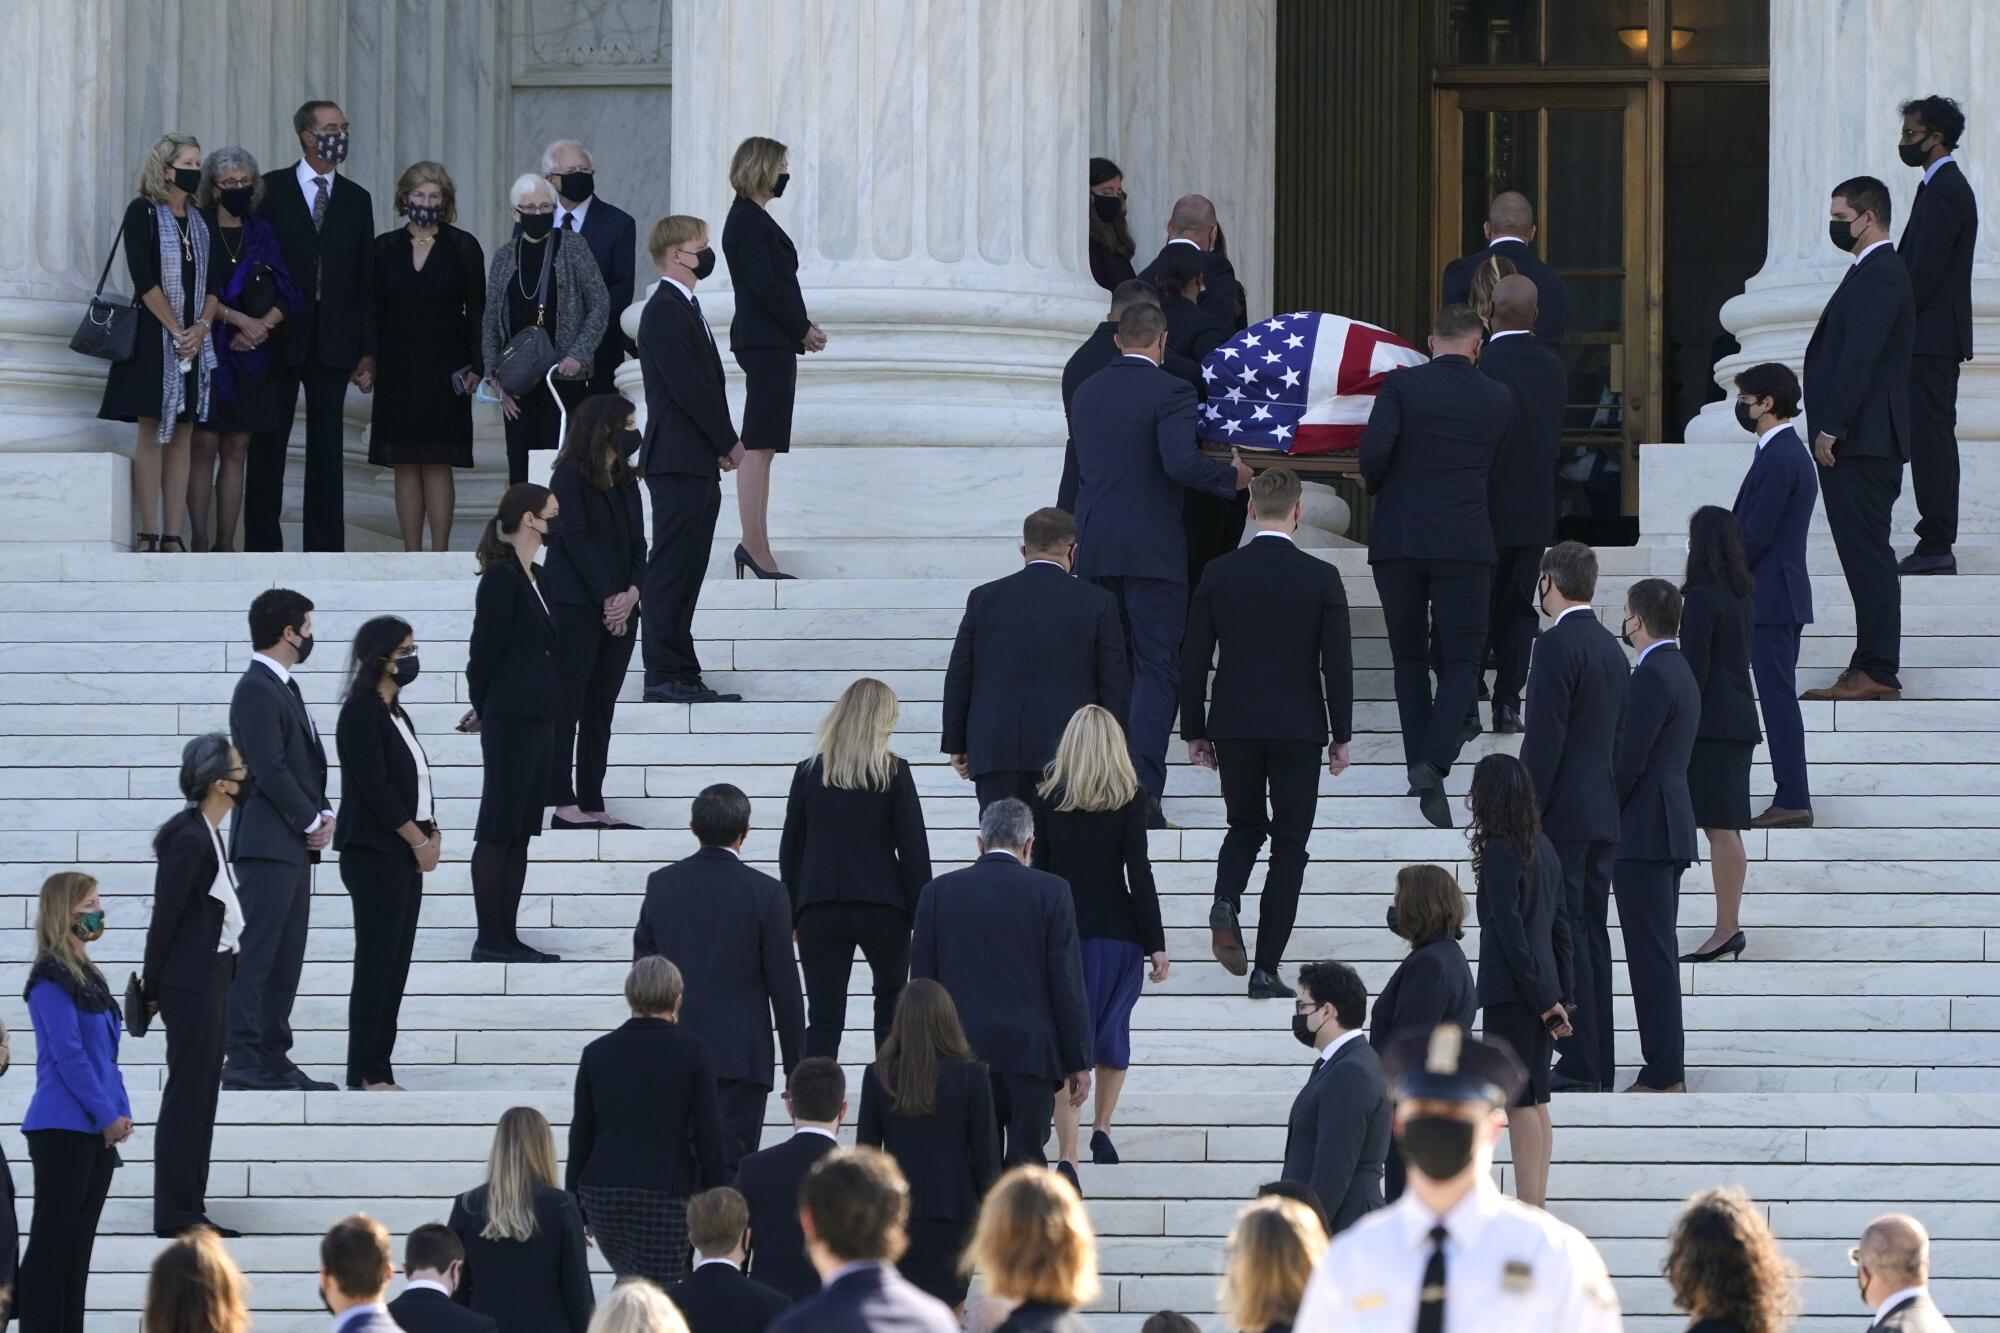 The flag-draped casket of Justice Ruth Bader Ginsburg arrives at the Supreme Court in Washington D.C.